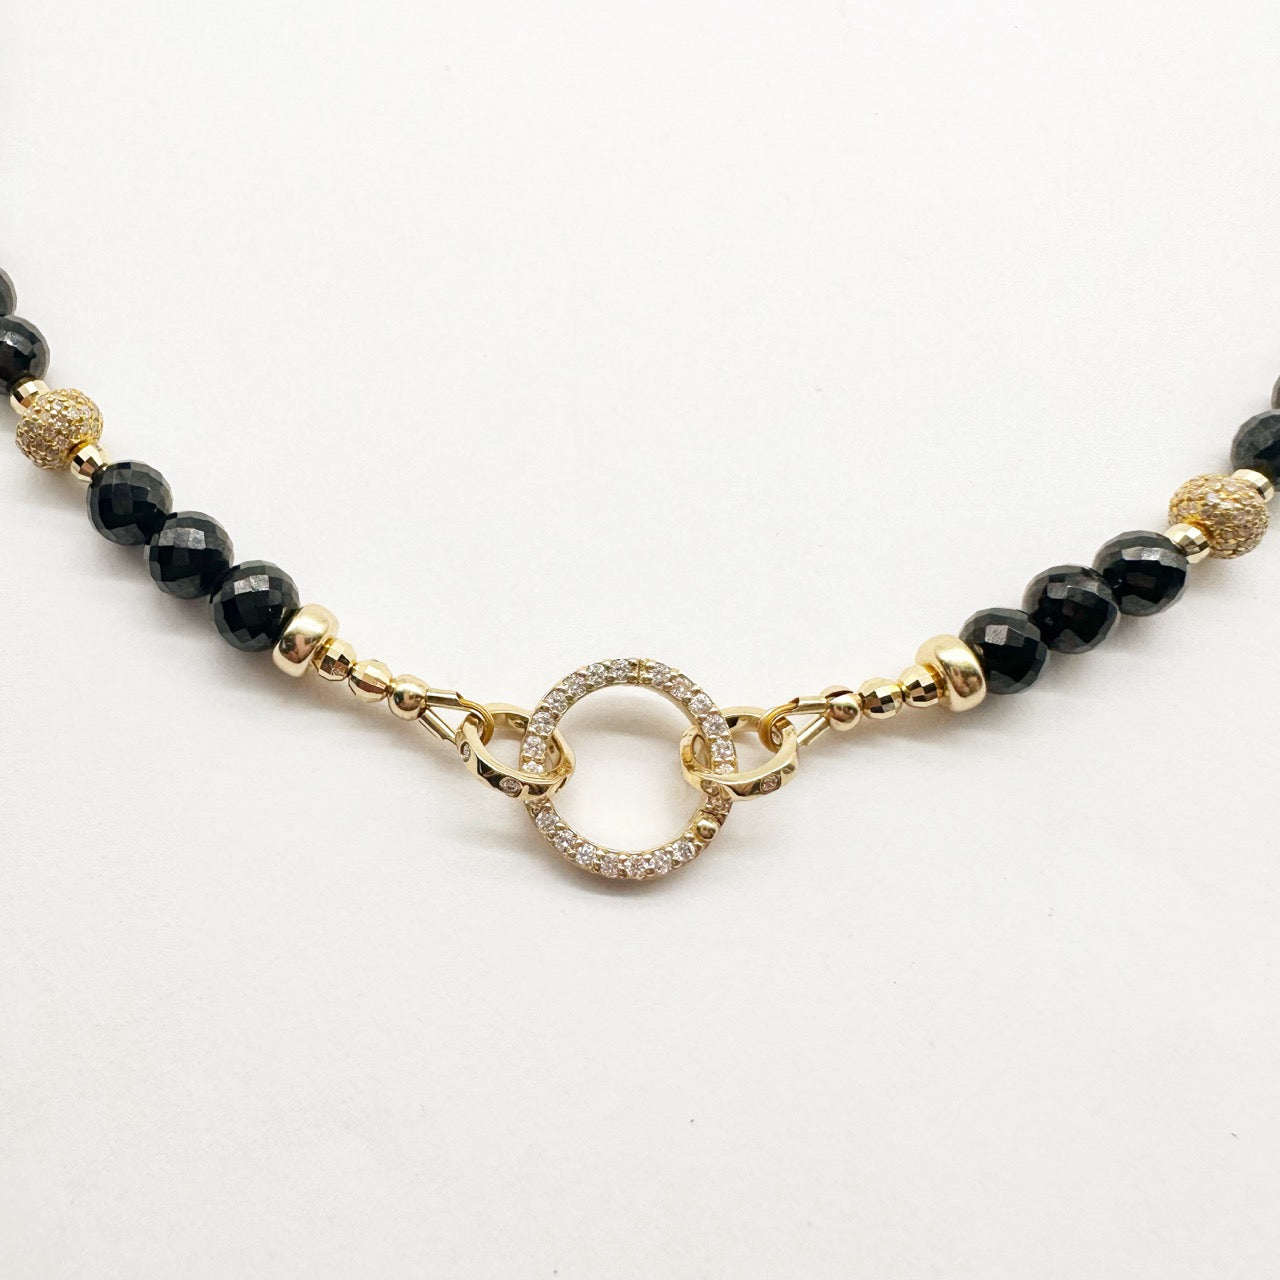 FACETED BLACK SPINEL NECKLACE WITH 14K GOLD & DIAMOND CHARM HOLDER